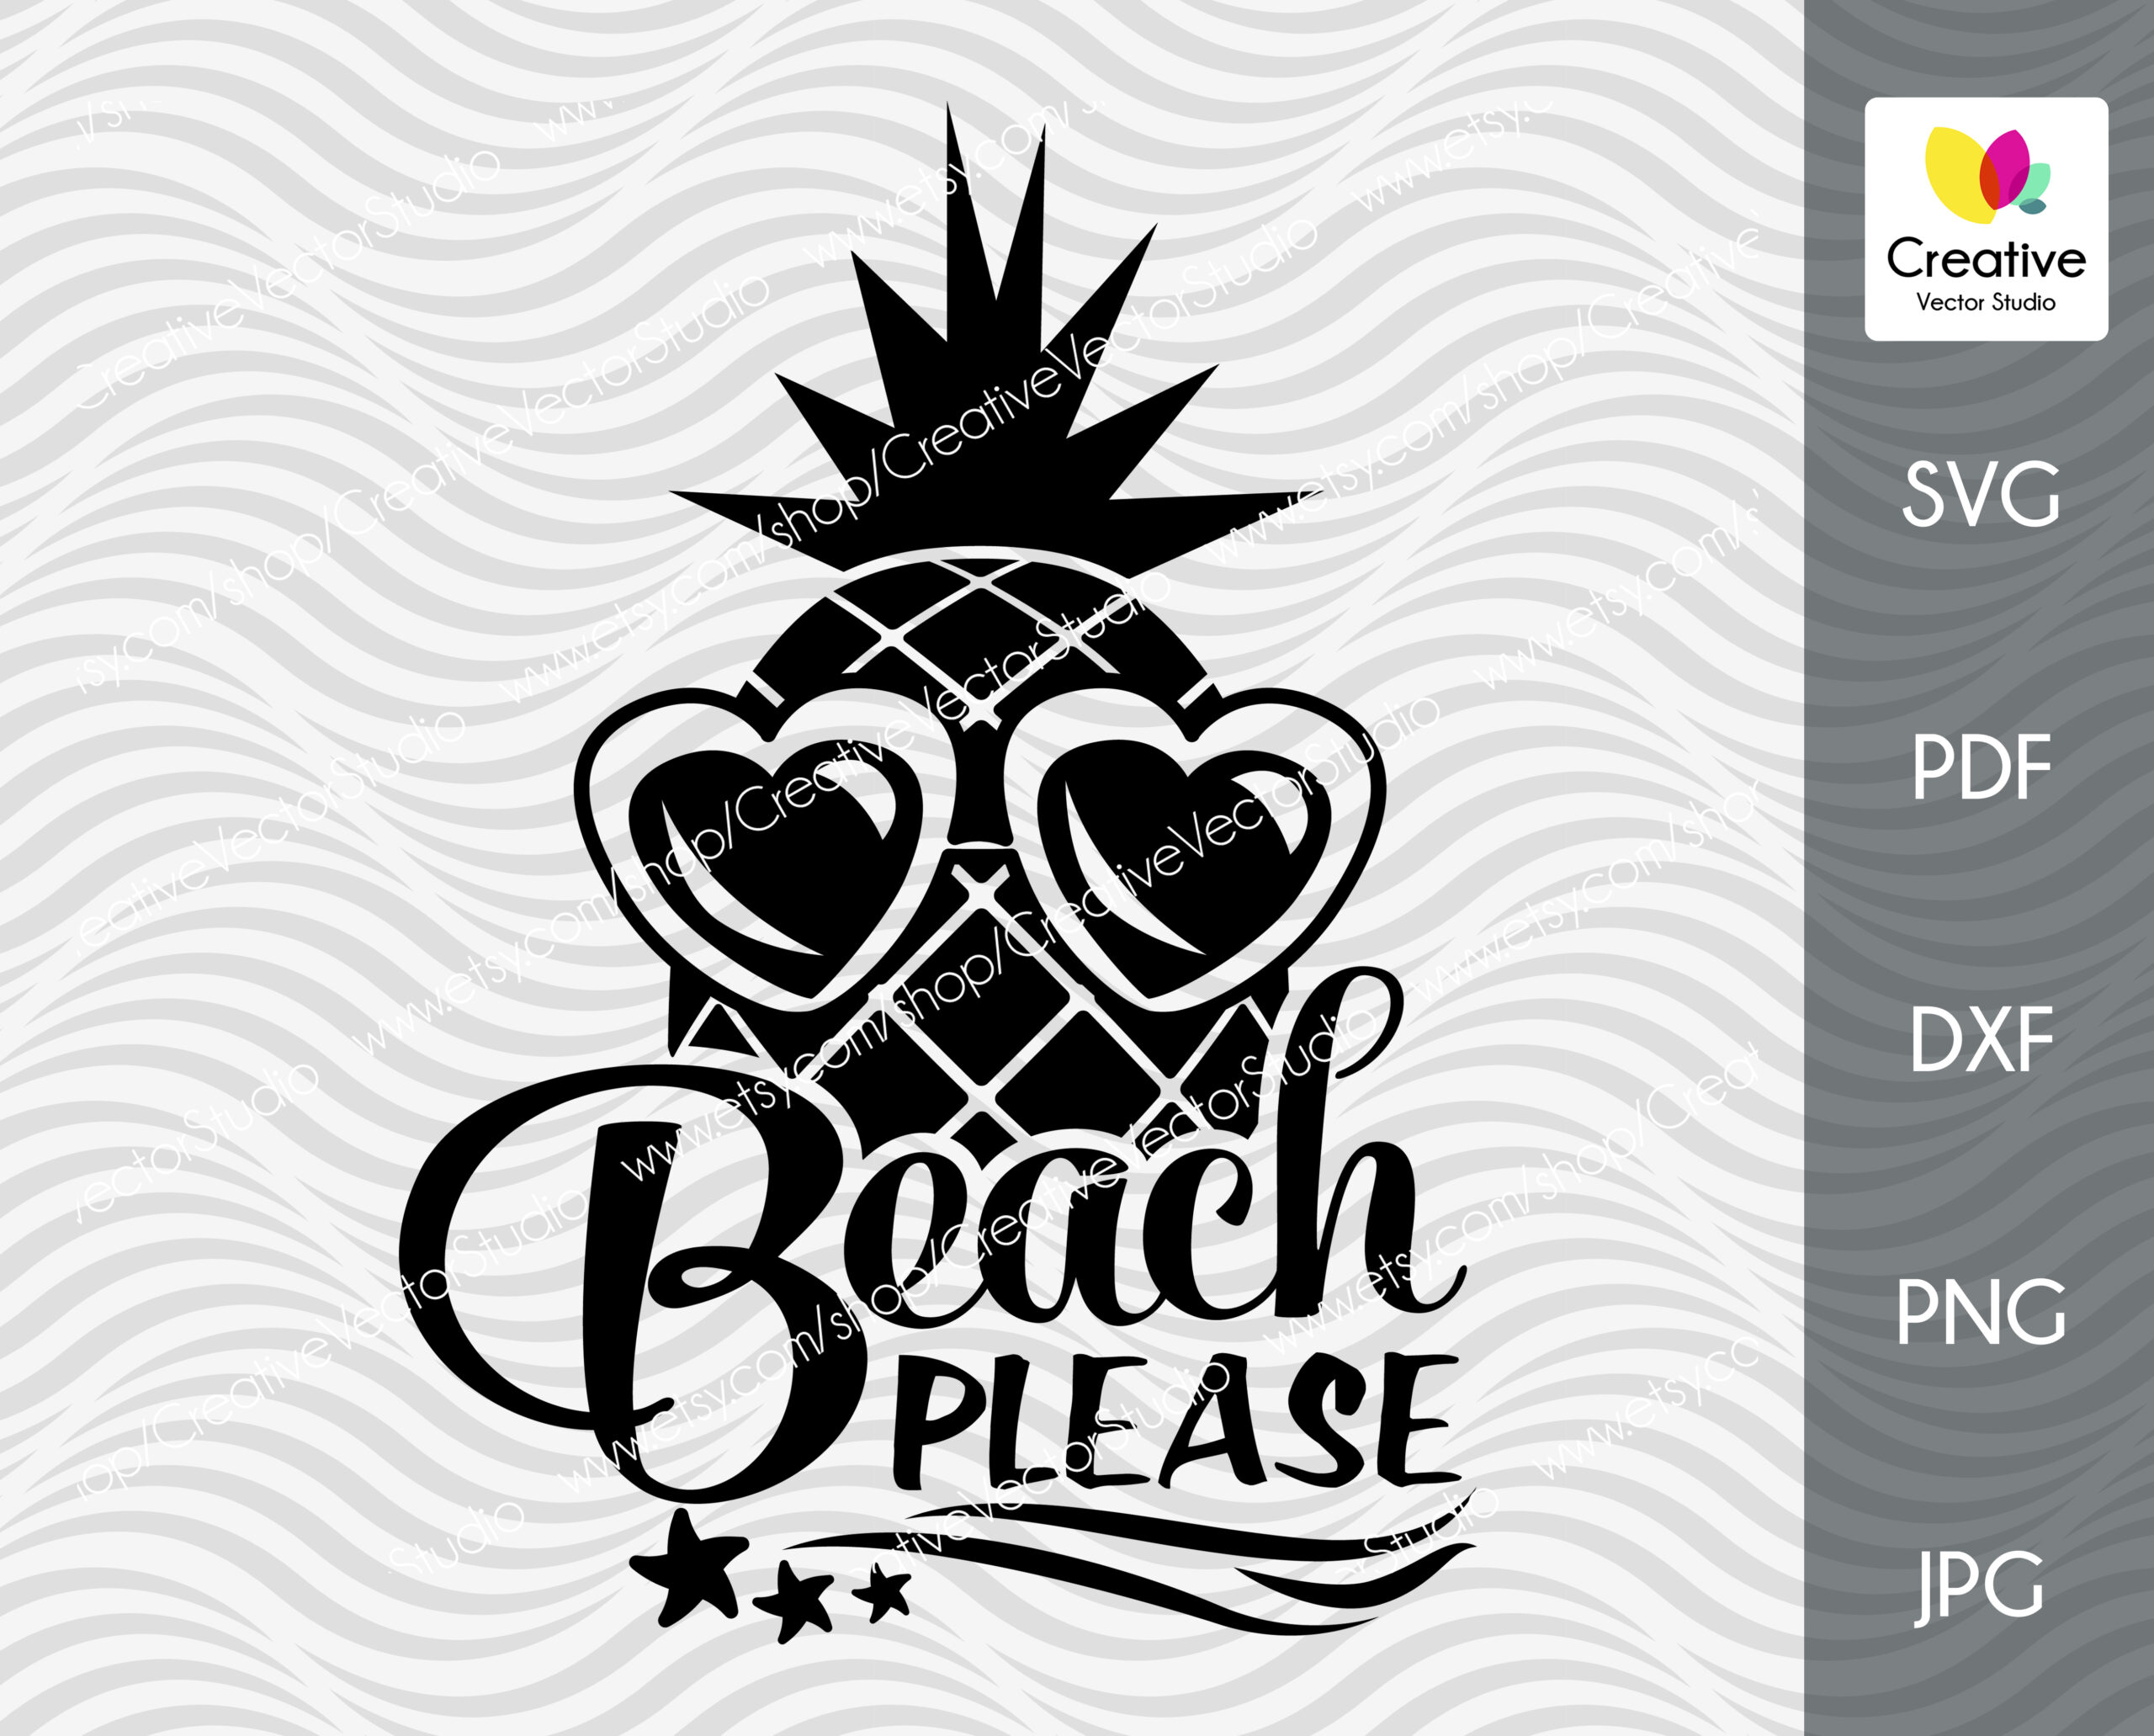 Download Pineapple with sunglasses svg, Beach please svg, Summer ...